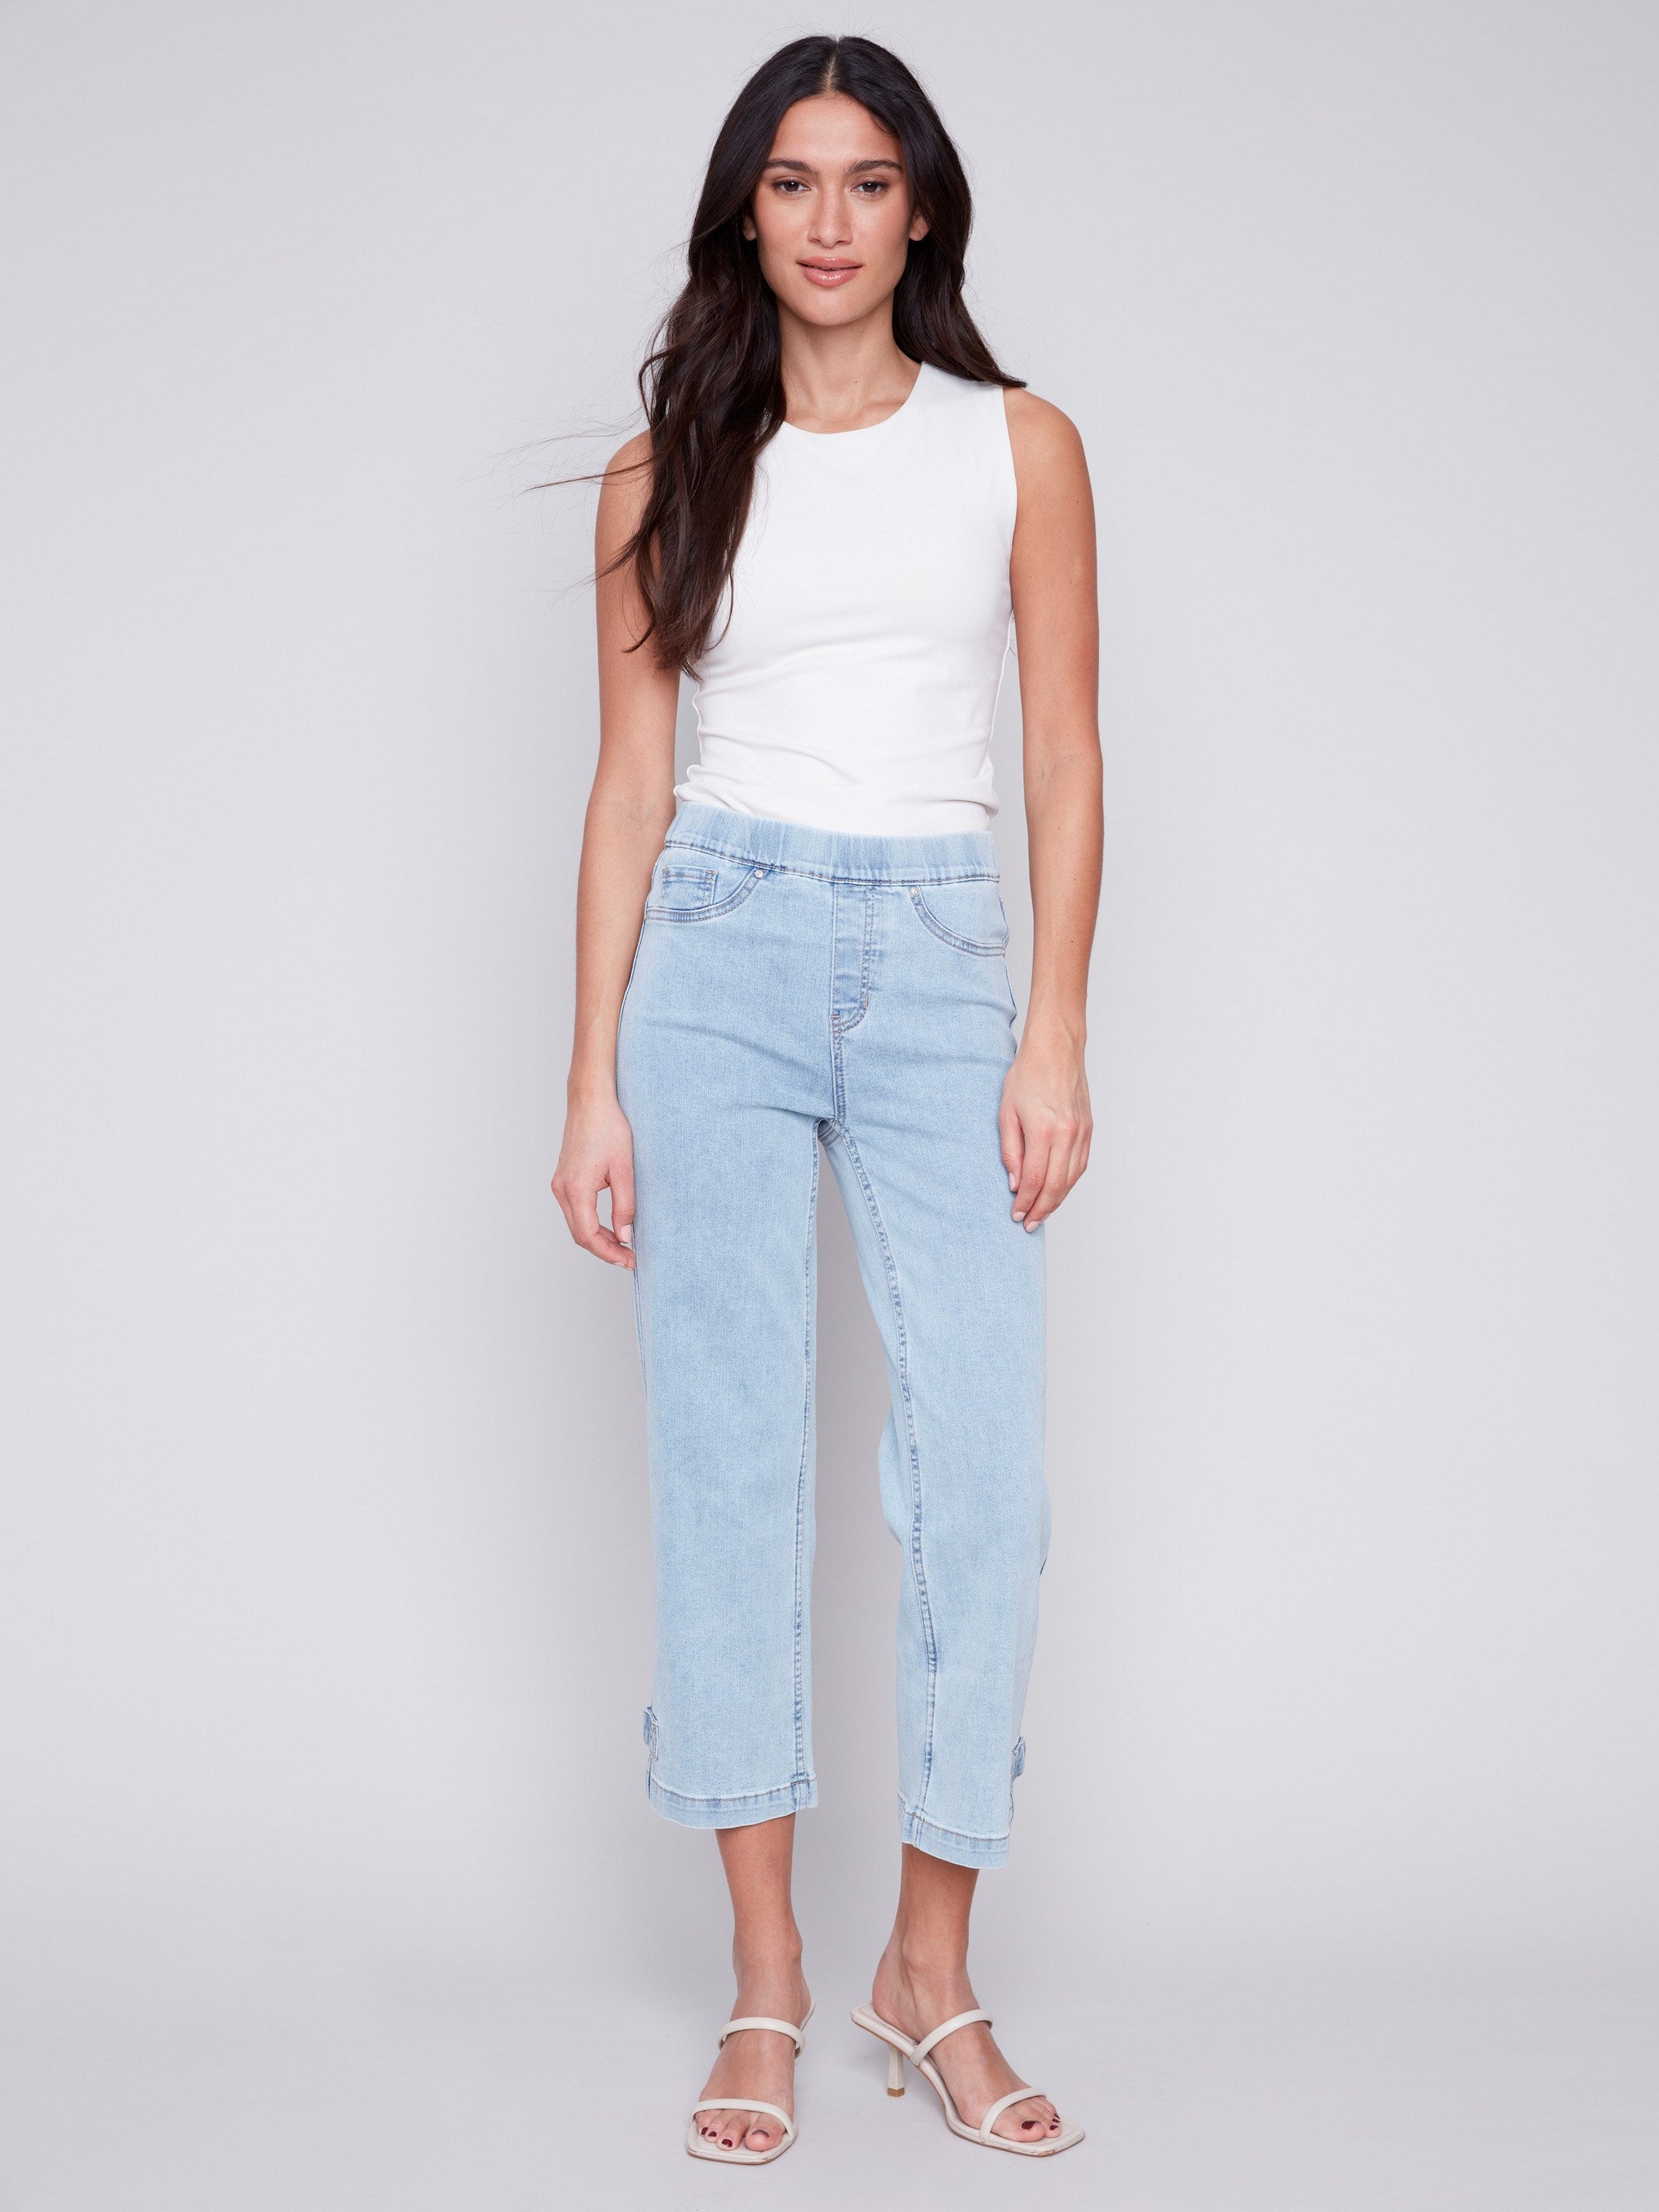 Cropped Pull-On Jeans with Hem Tab - Bleach Blue - Charlie B Collection Canada - Image 1